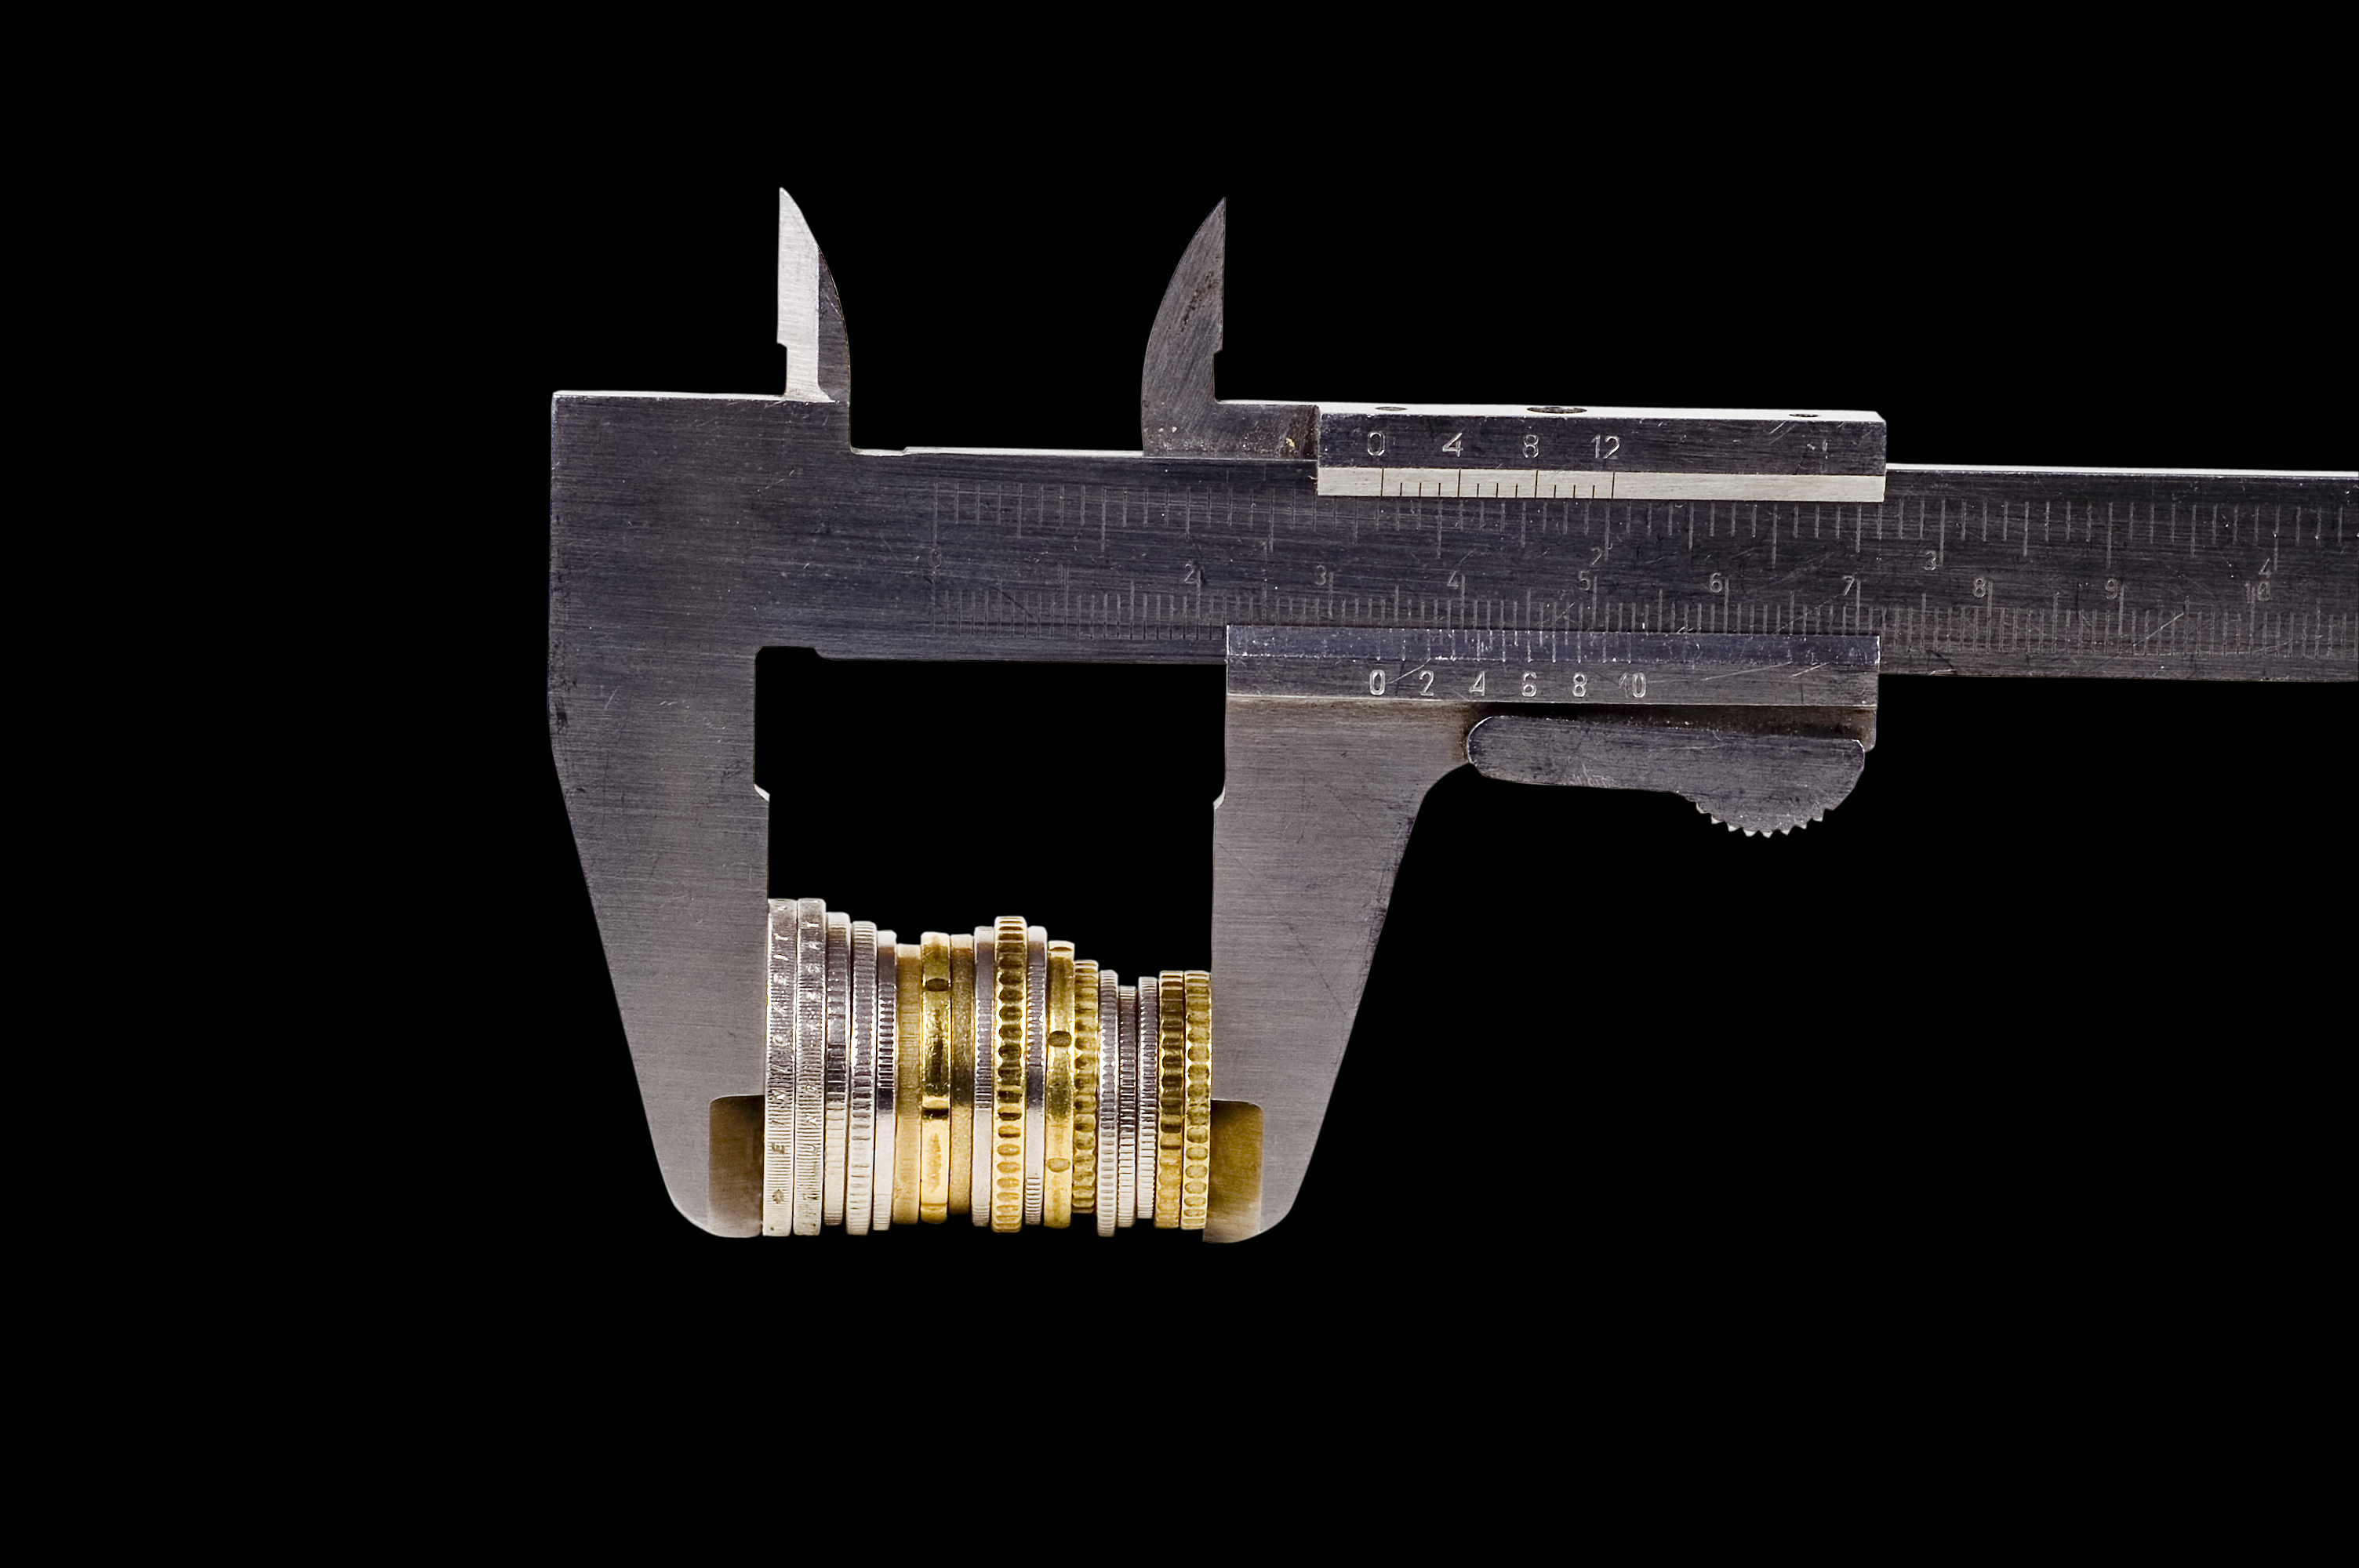 Vernier calipers measuring a stack of coins